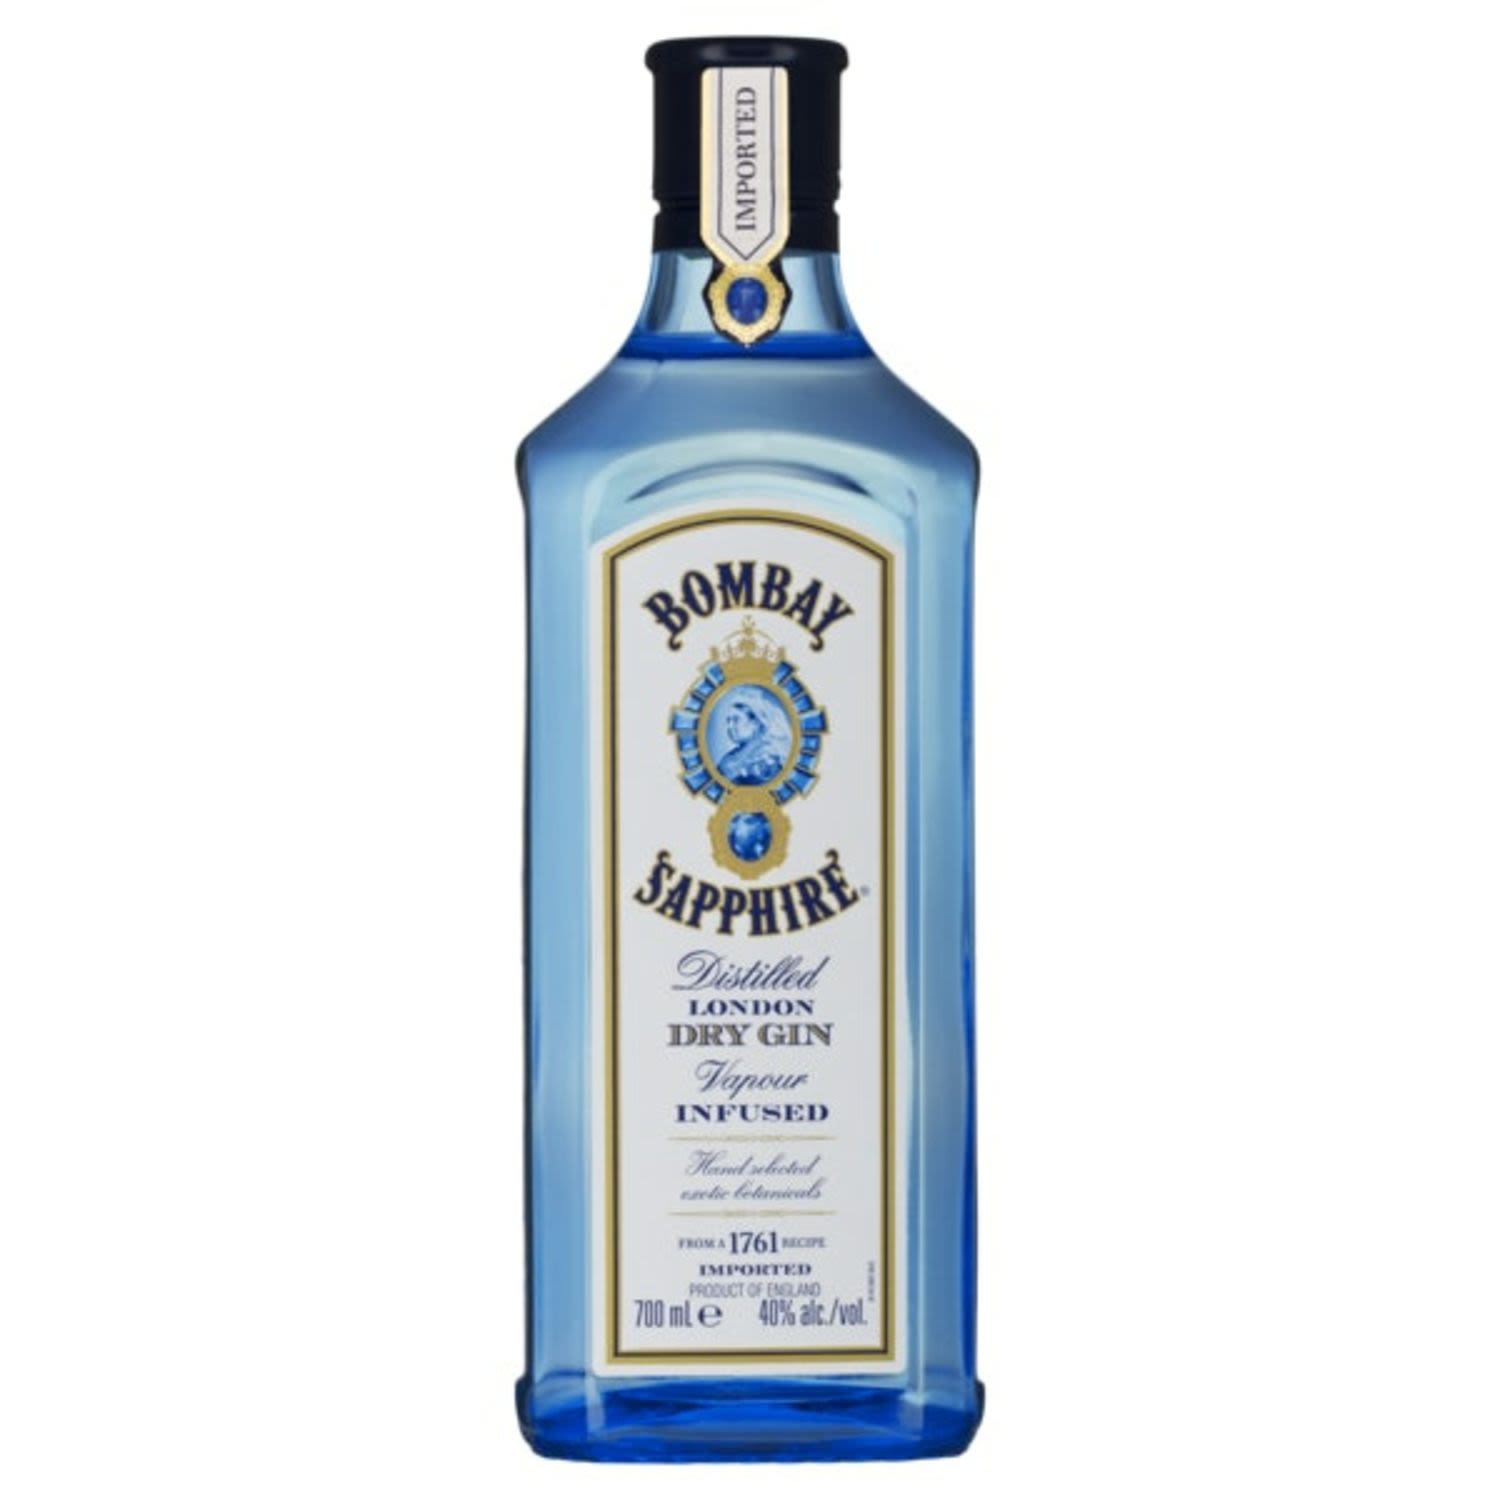 Bombay Sapphire Gin is a uniquely balanced premium gin, leading the gin revival worldwide. It is recognisable by its exquisite bottle shape and distinctive sapphire-blue livery.<br /> <br />Alcohol Volume: 40.00%<br /><br />Pack Format: Bottle<br /><br />Standard Drinks: 22<br /><br />Pack Type: Bottle<br /><br />Country of Origin: England<br />